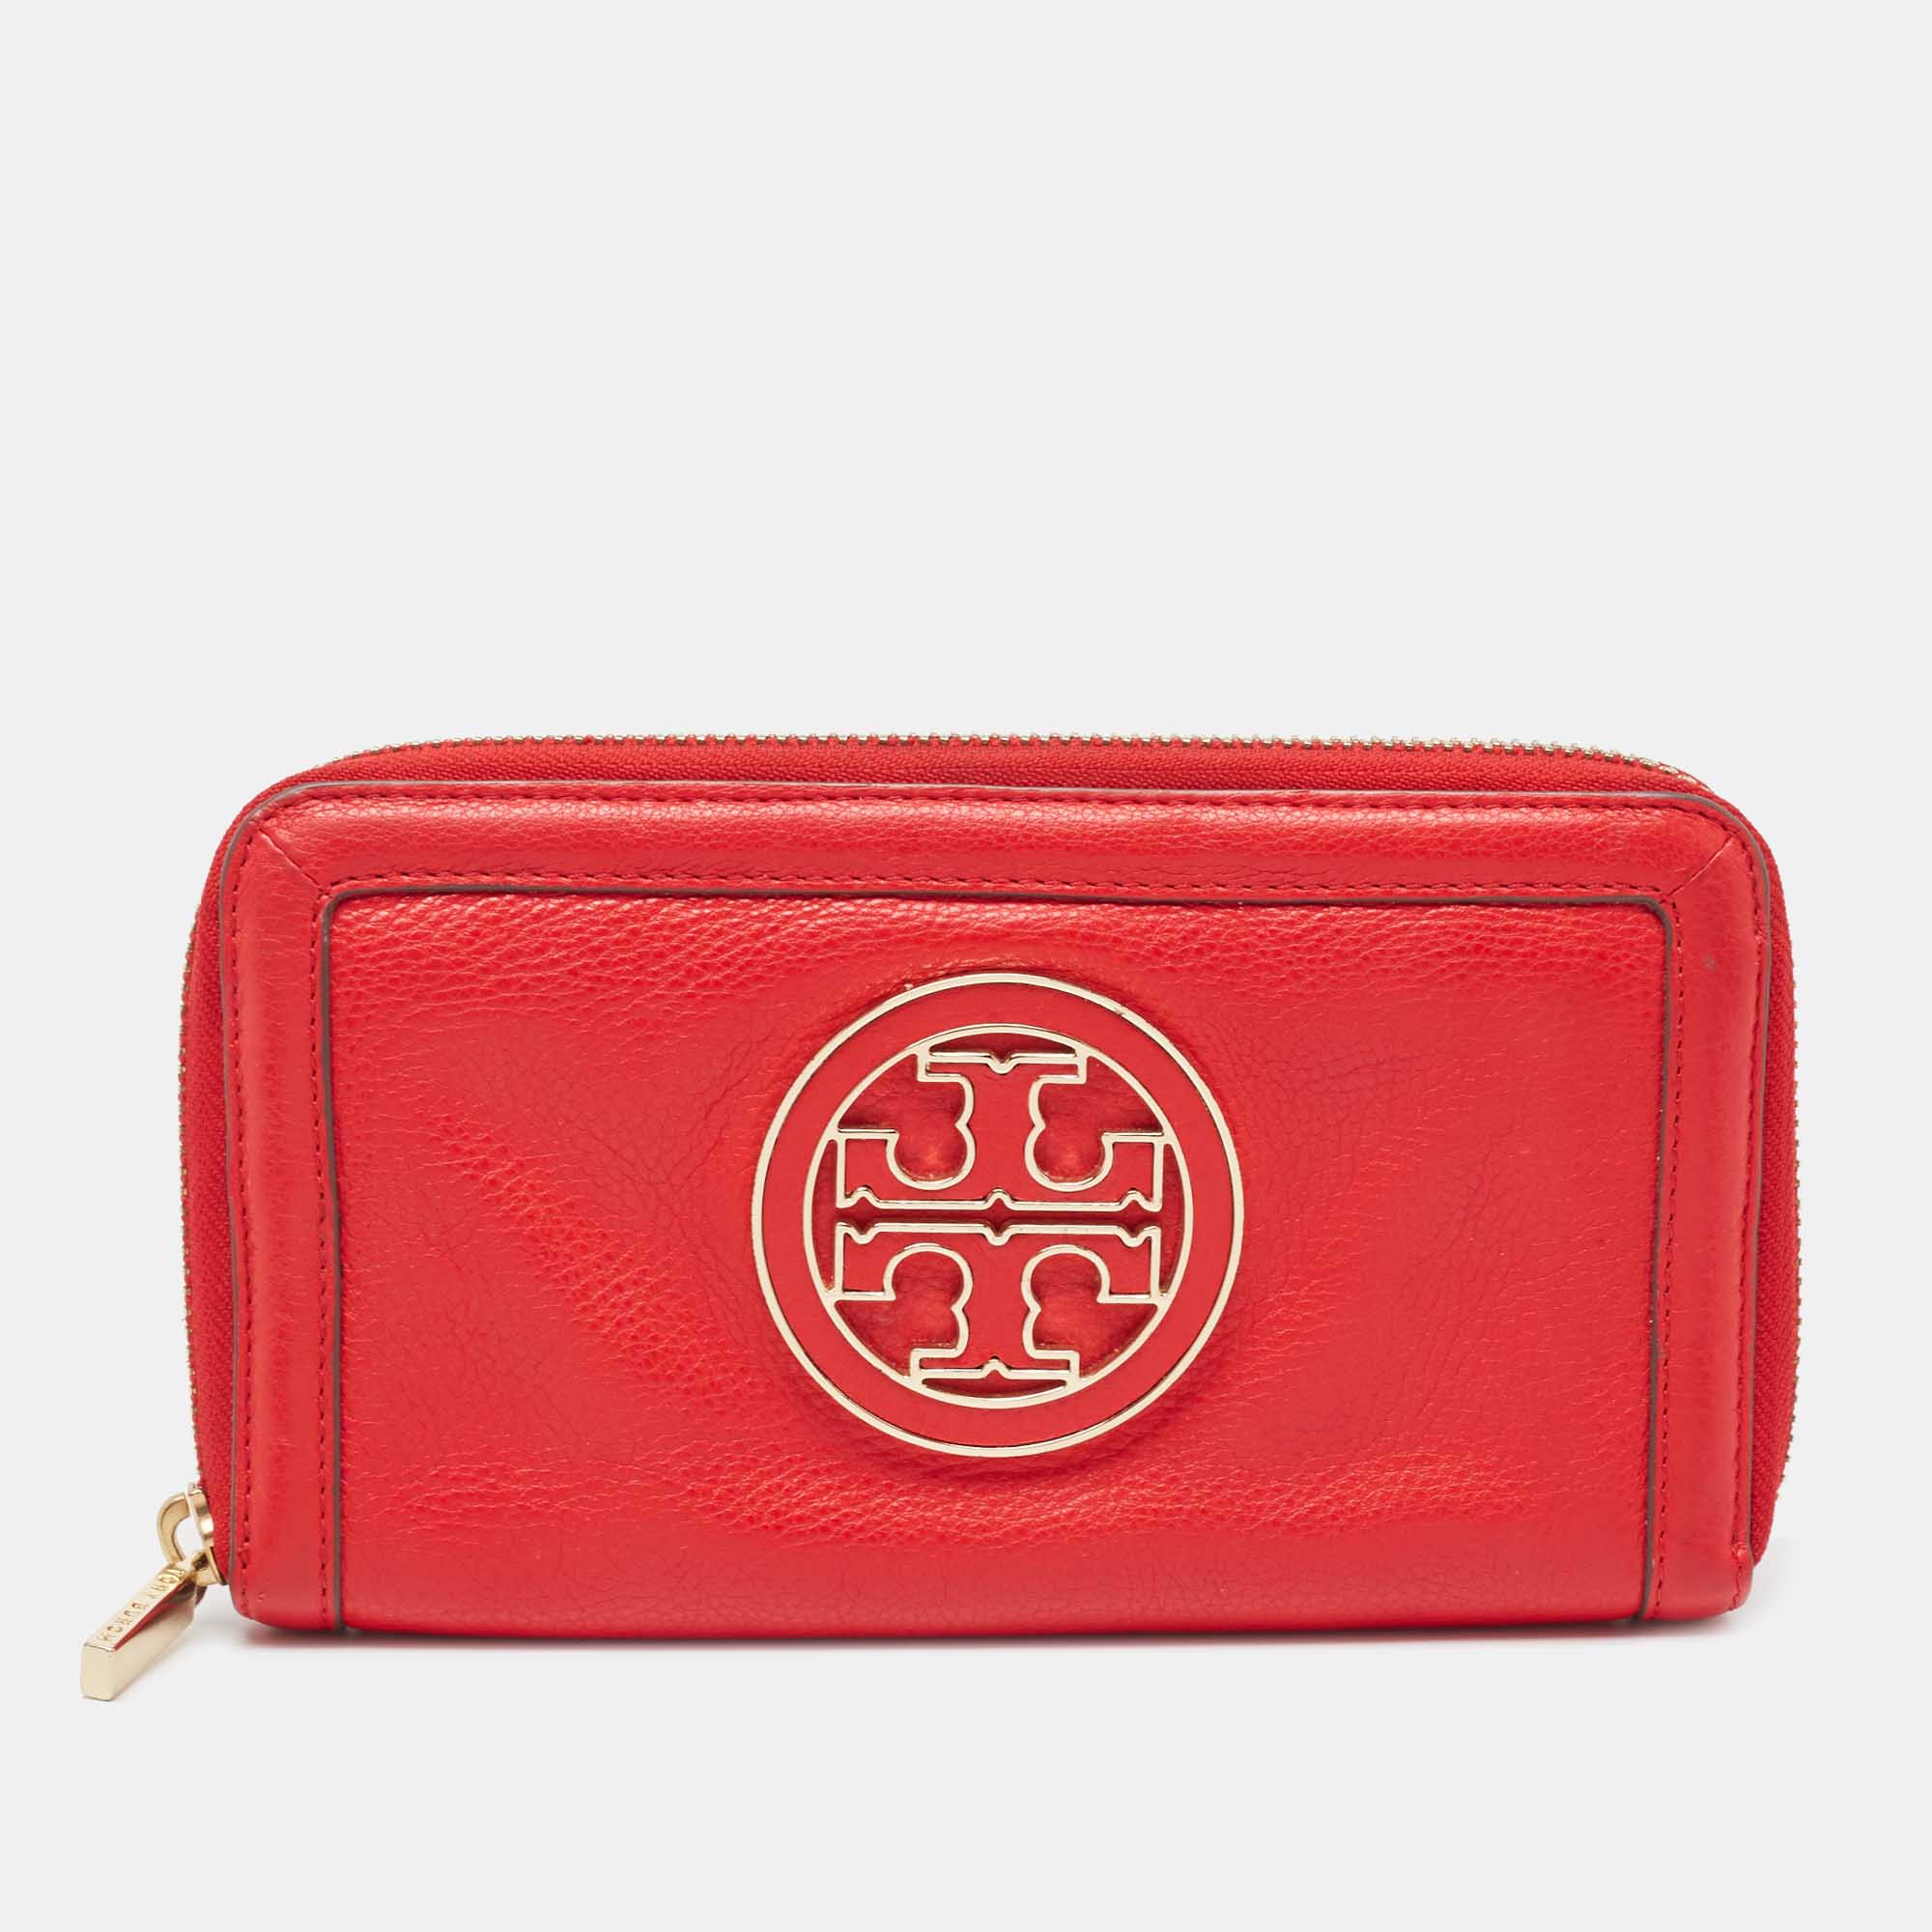 Pre-owned Tory Burch Red Leather Amanda Continental Zip Around Wallet